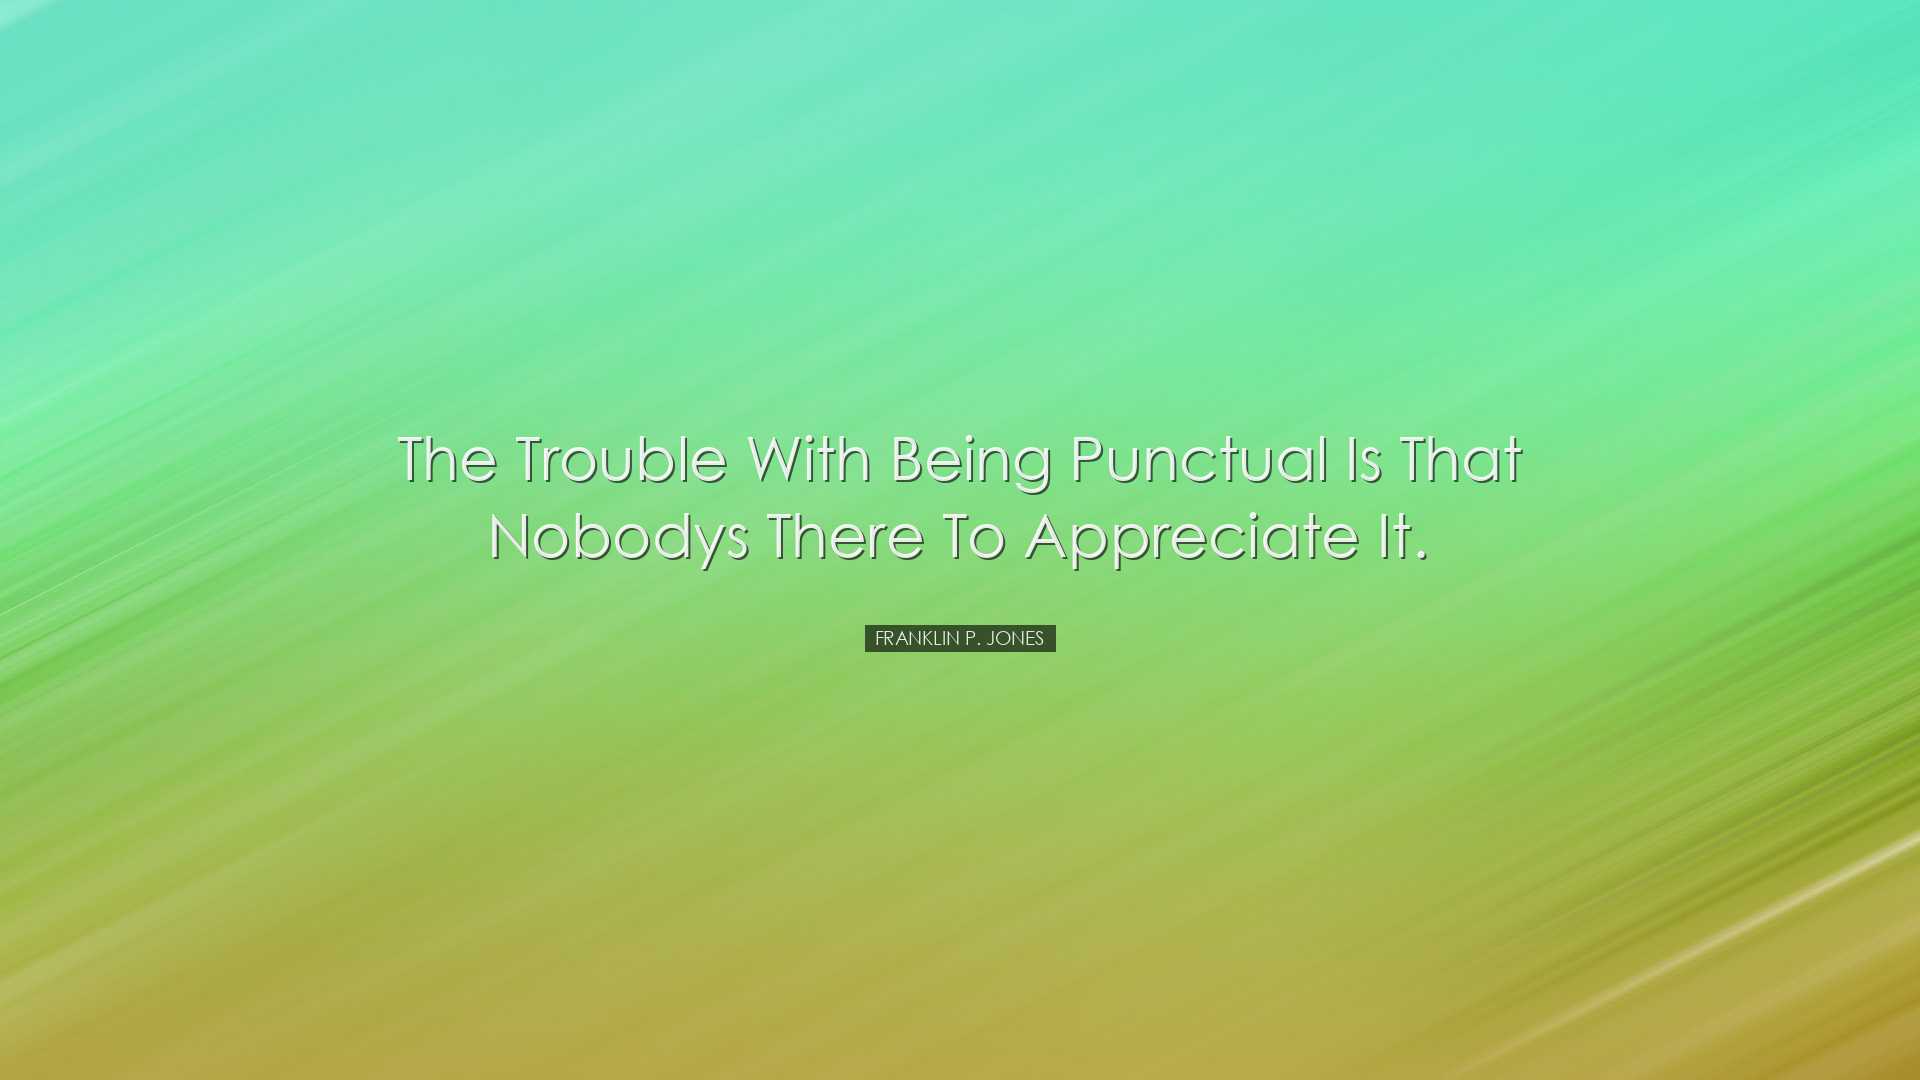 The trouble with being punctual is that nobodys there to appreciat